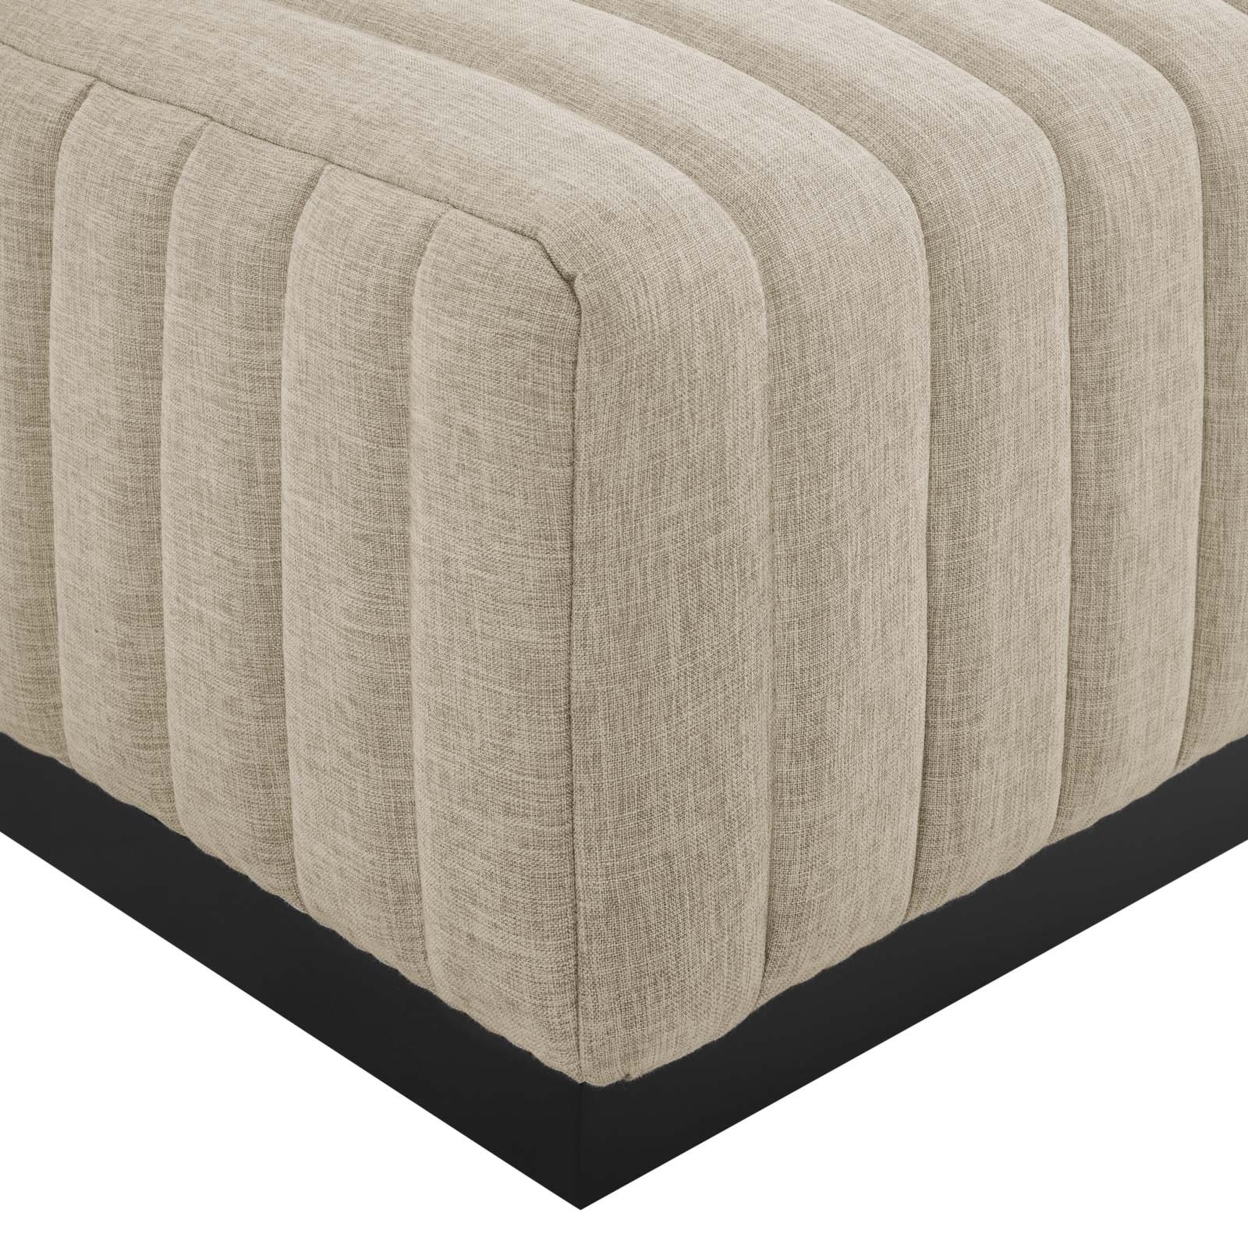 Conjure Channel Tufted Upholstered Fabric Ottoman, Black Beige